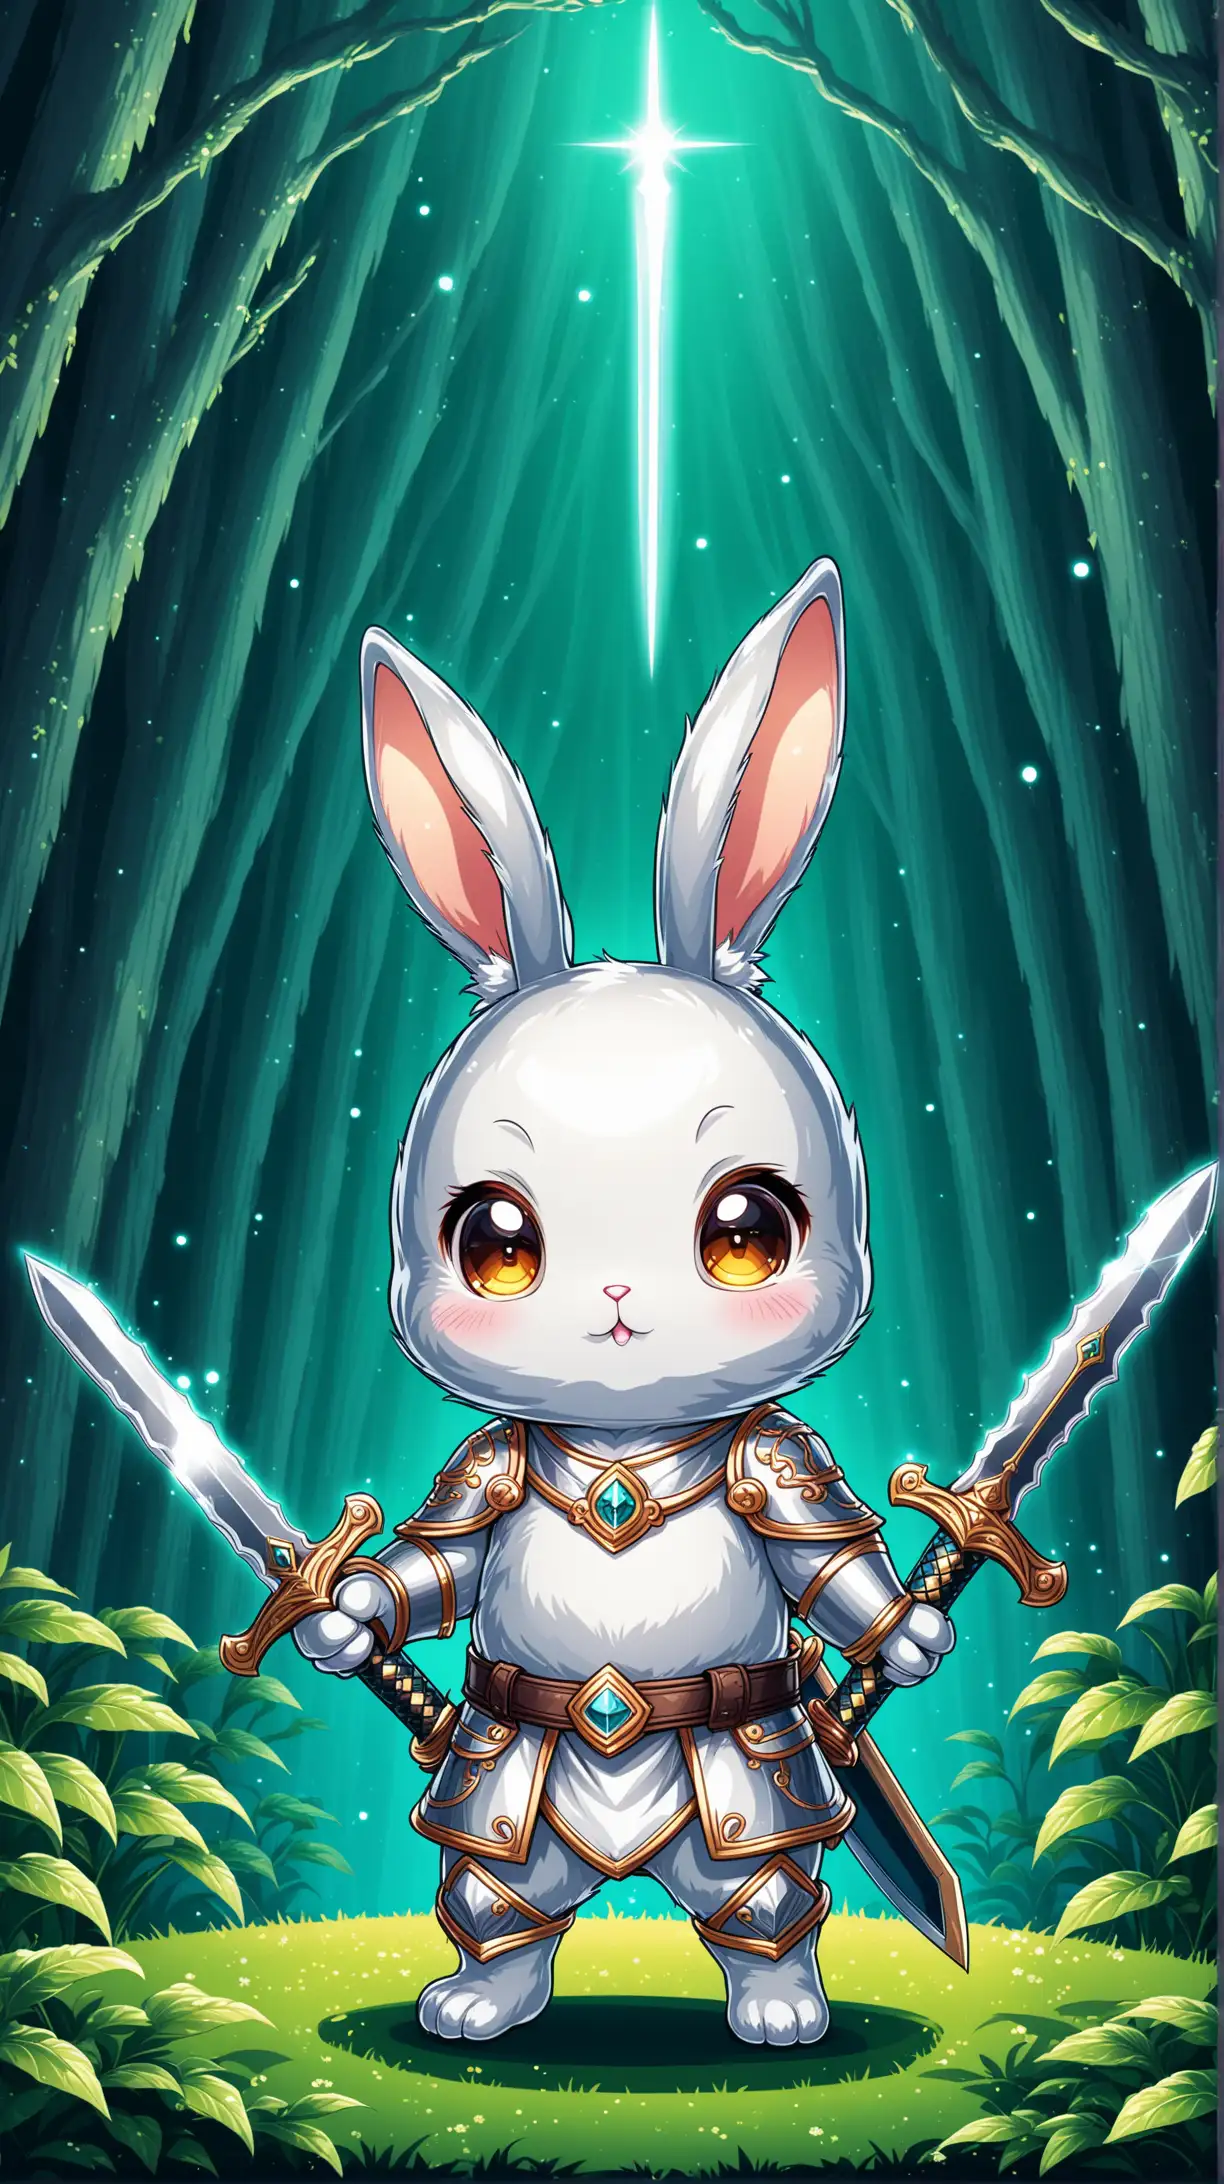 Cute rabbit cartoon character whose body is made from silver , sword, mysterious background 